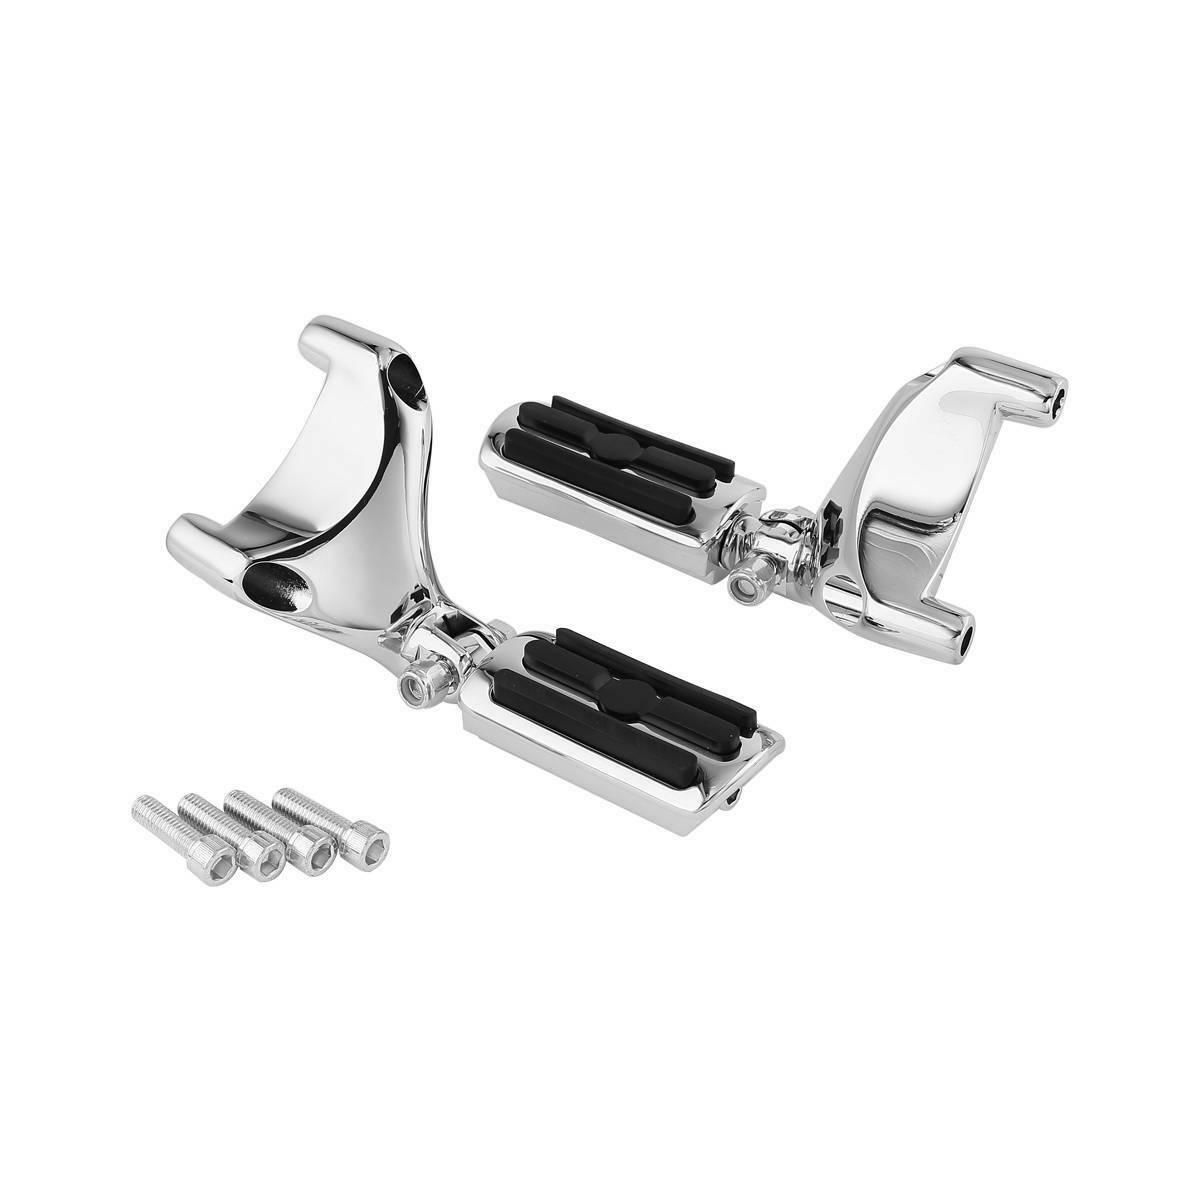 Footrest Mounting Bracket Footpegs Fit For Harley 883 1200 XL Sportster 04-13 - Moto Life Products